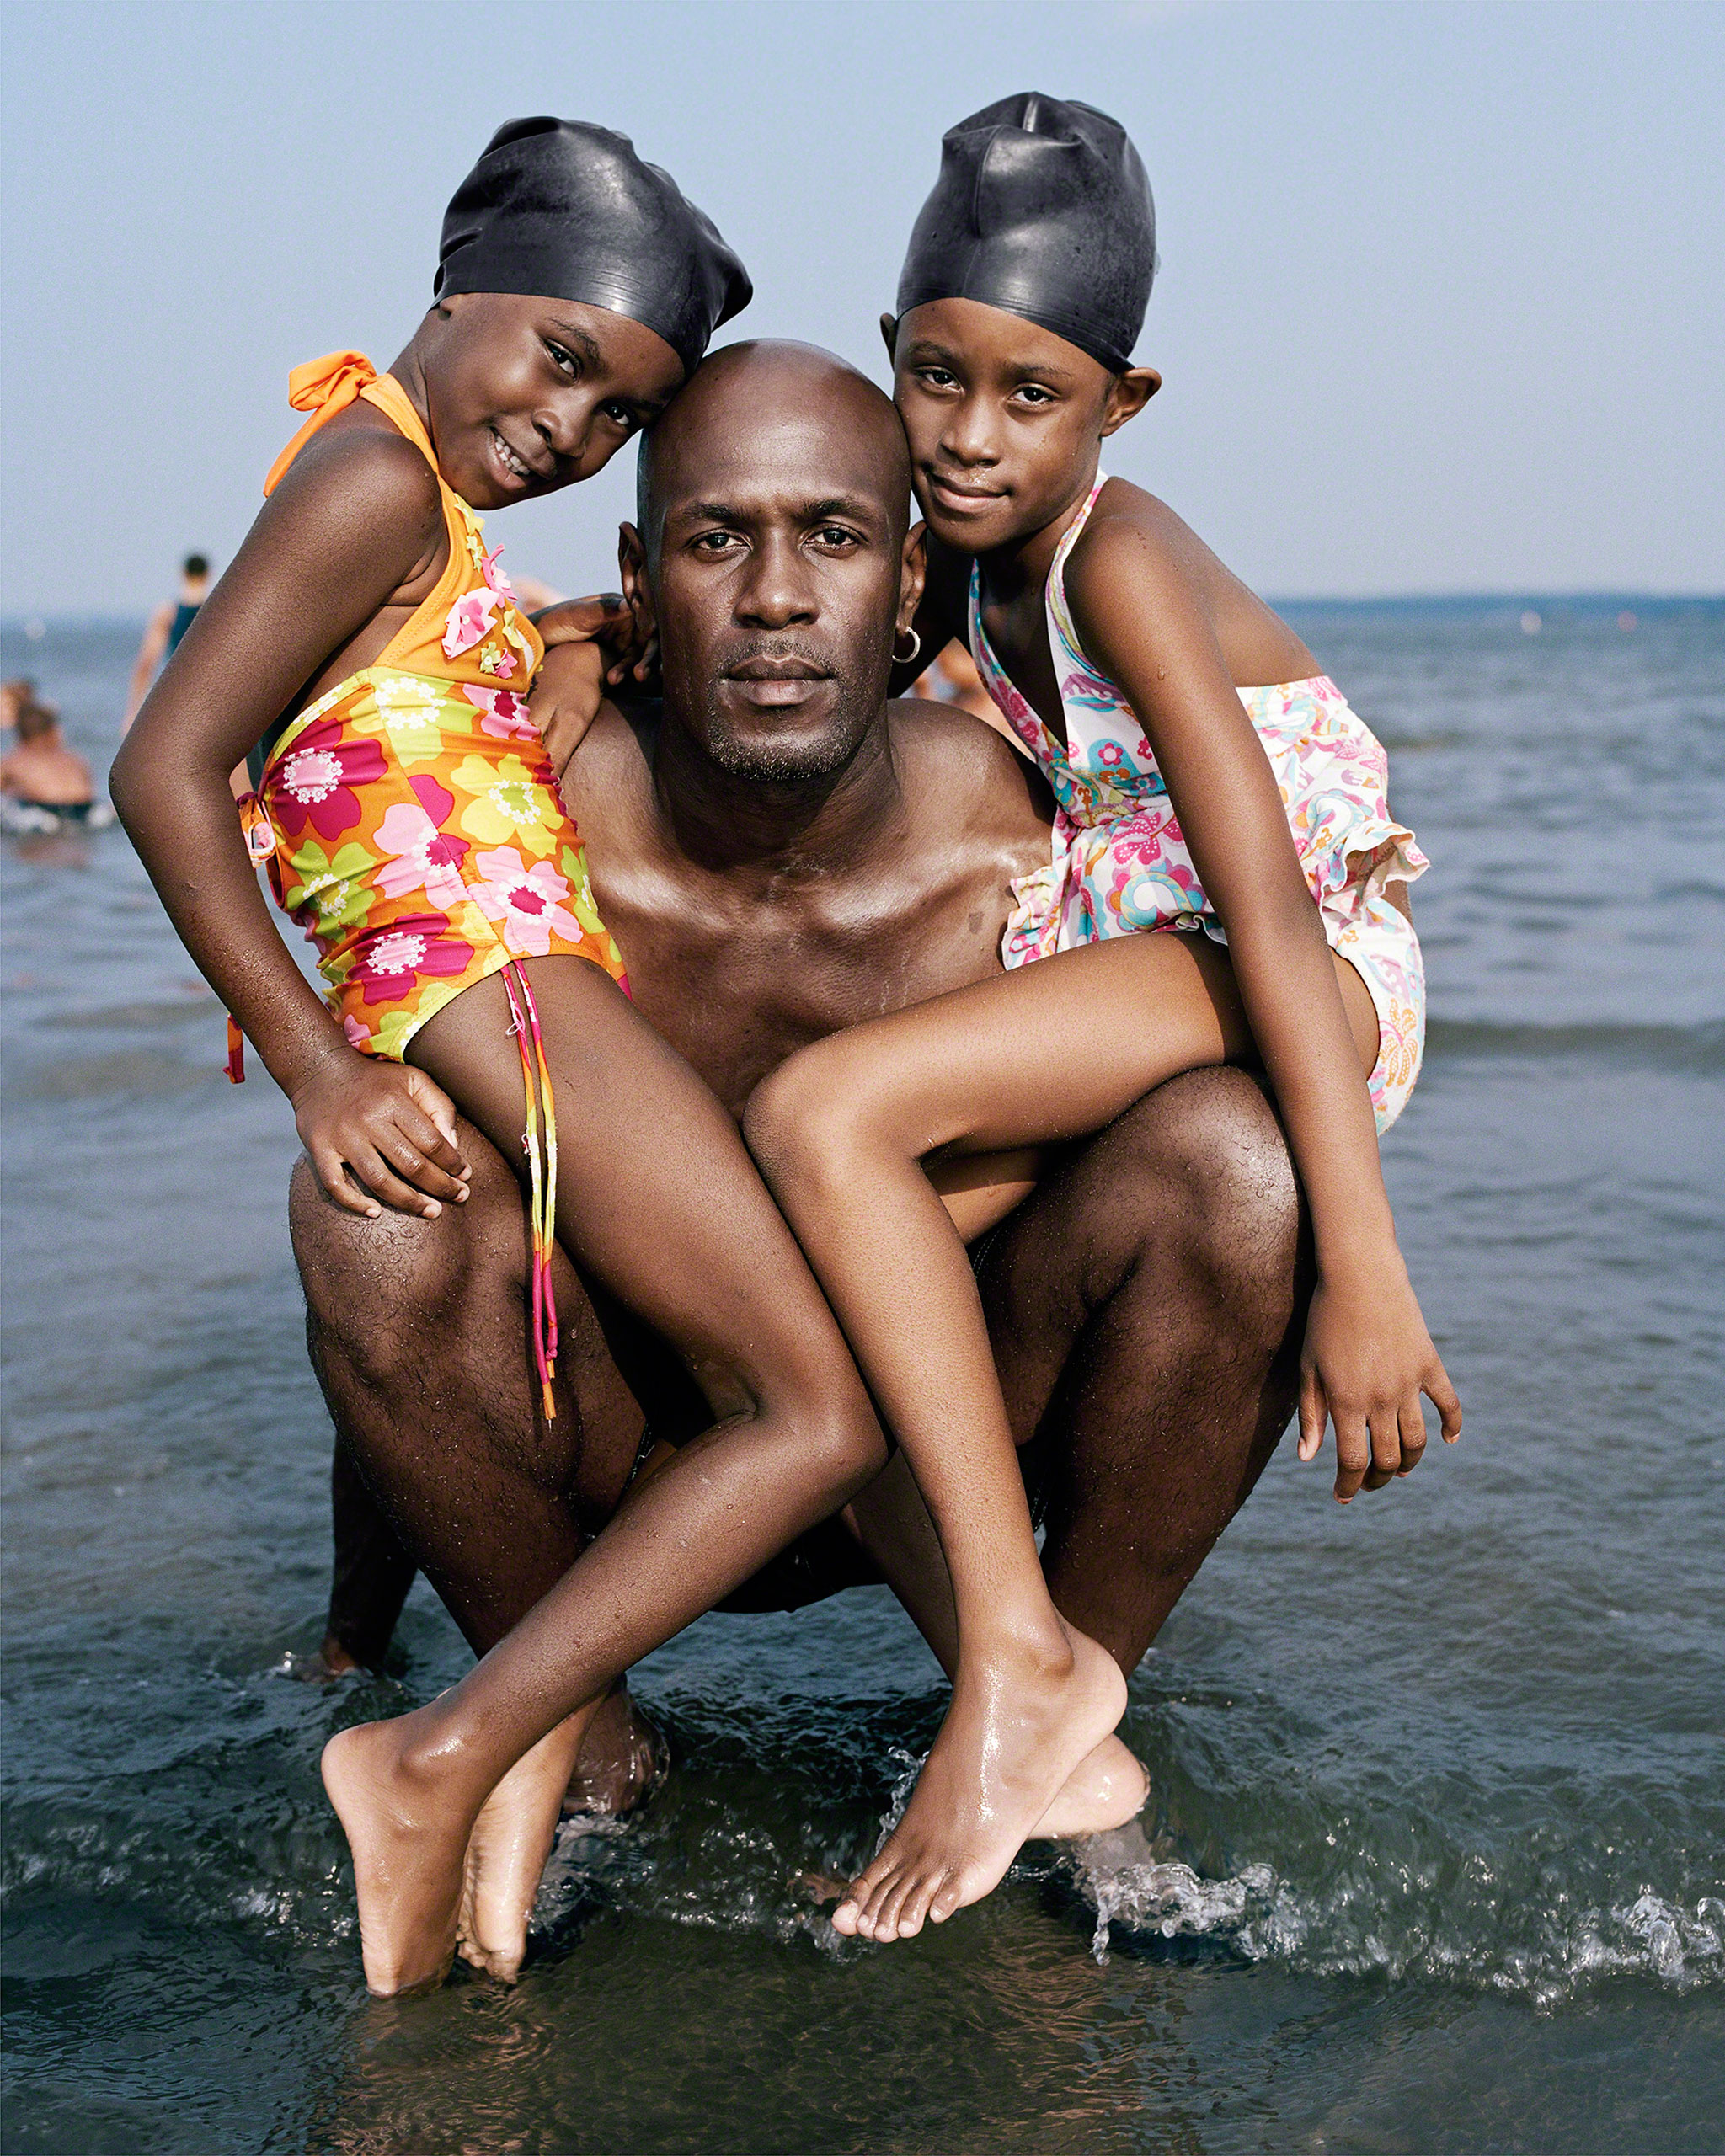 Kye, Kaiya and Kamren, 2009, from Orchard Beach: The Bronx Riviera, a series and book of summer regulars on the only beach in the Bronx, New York.